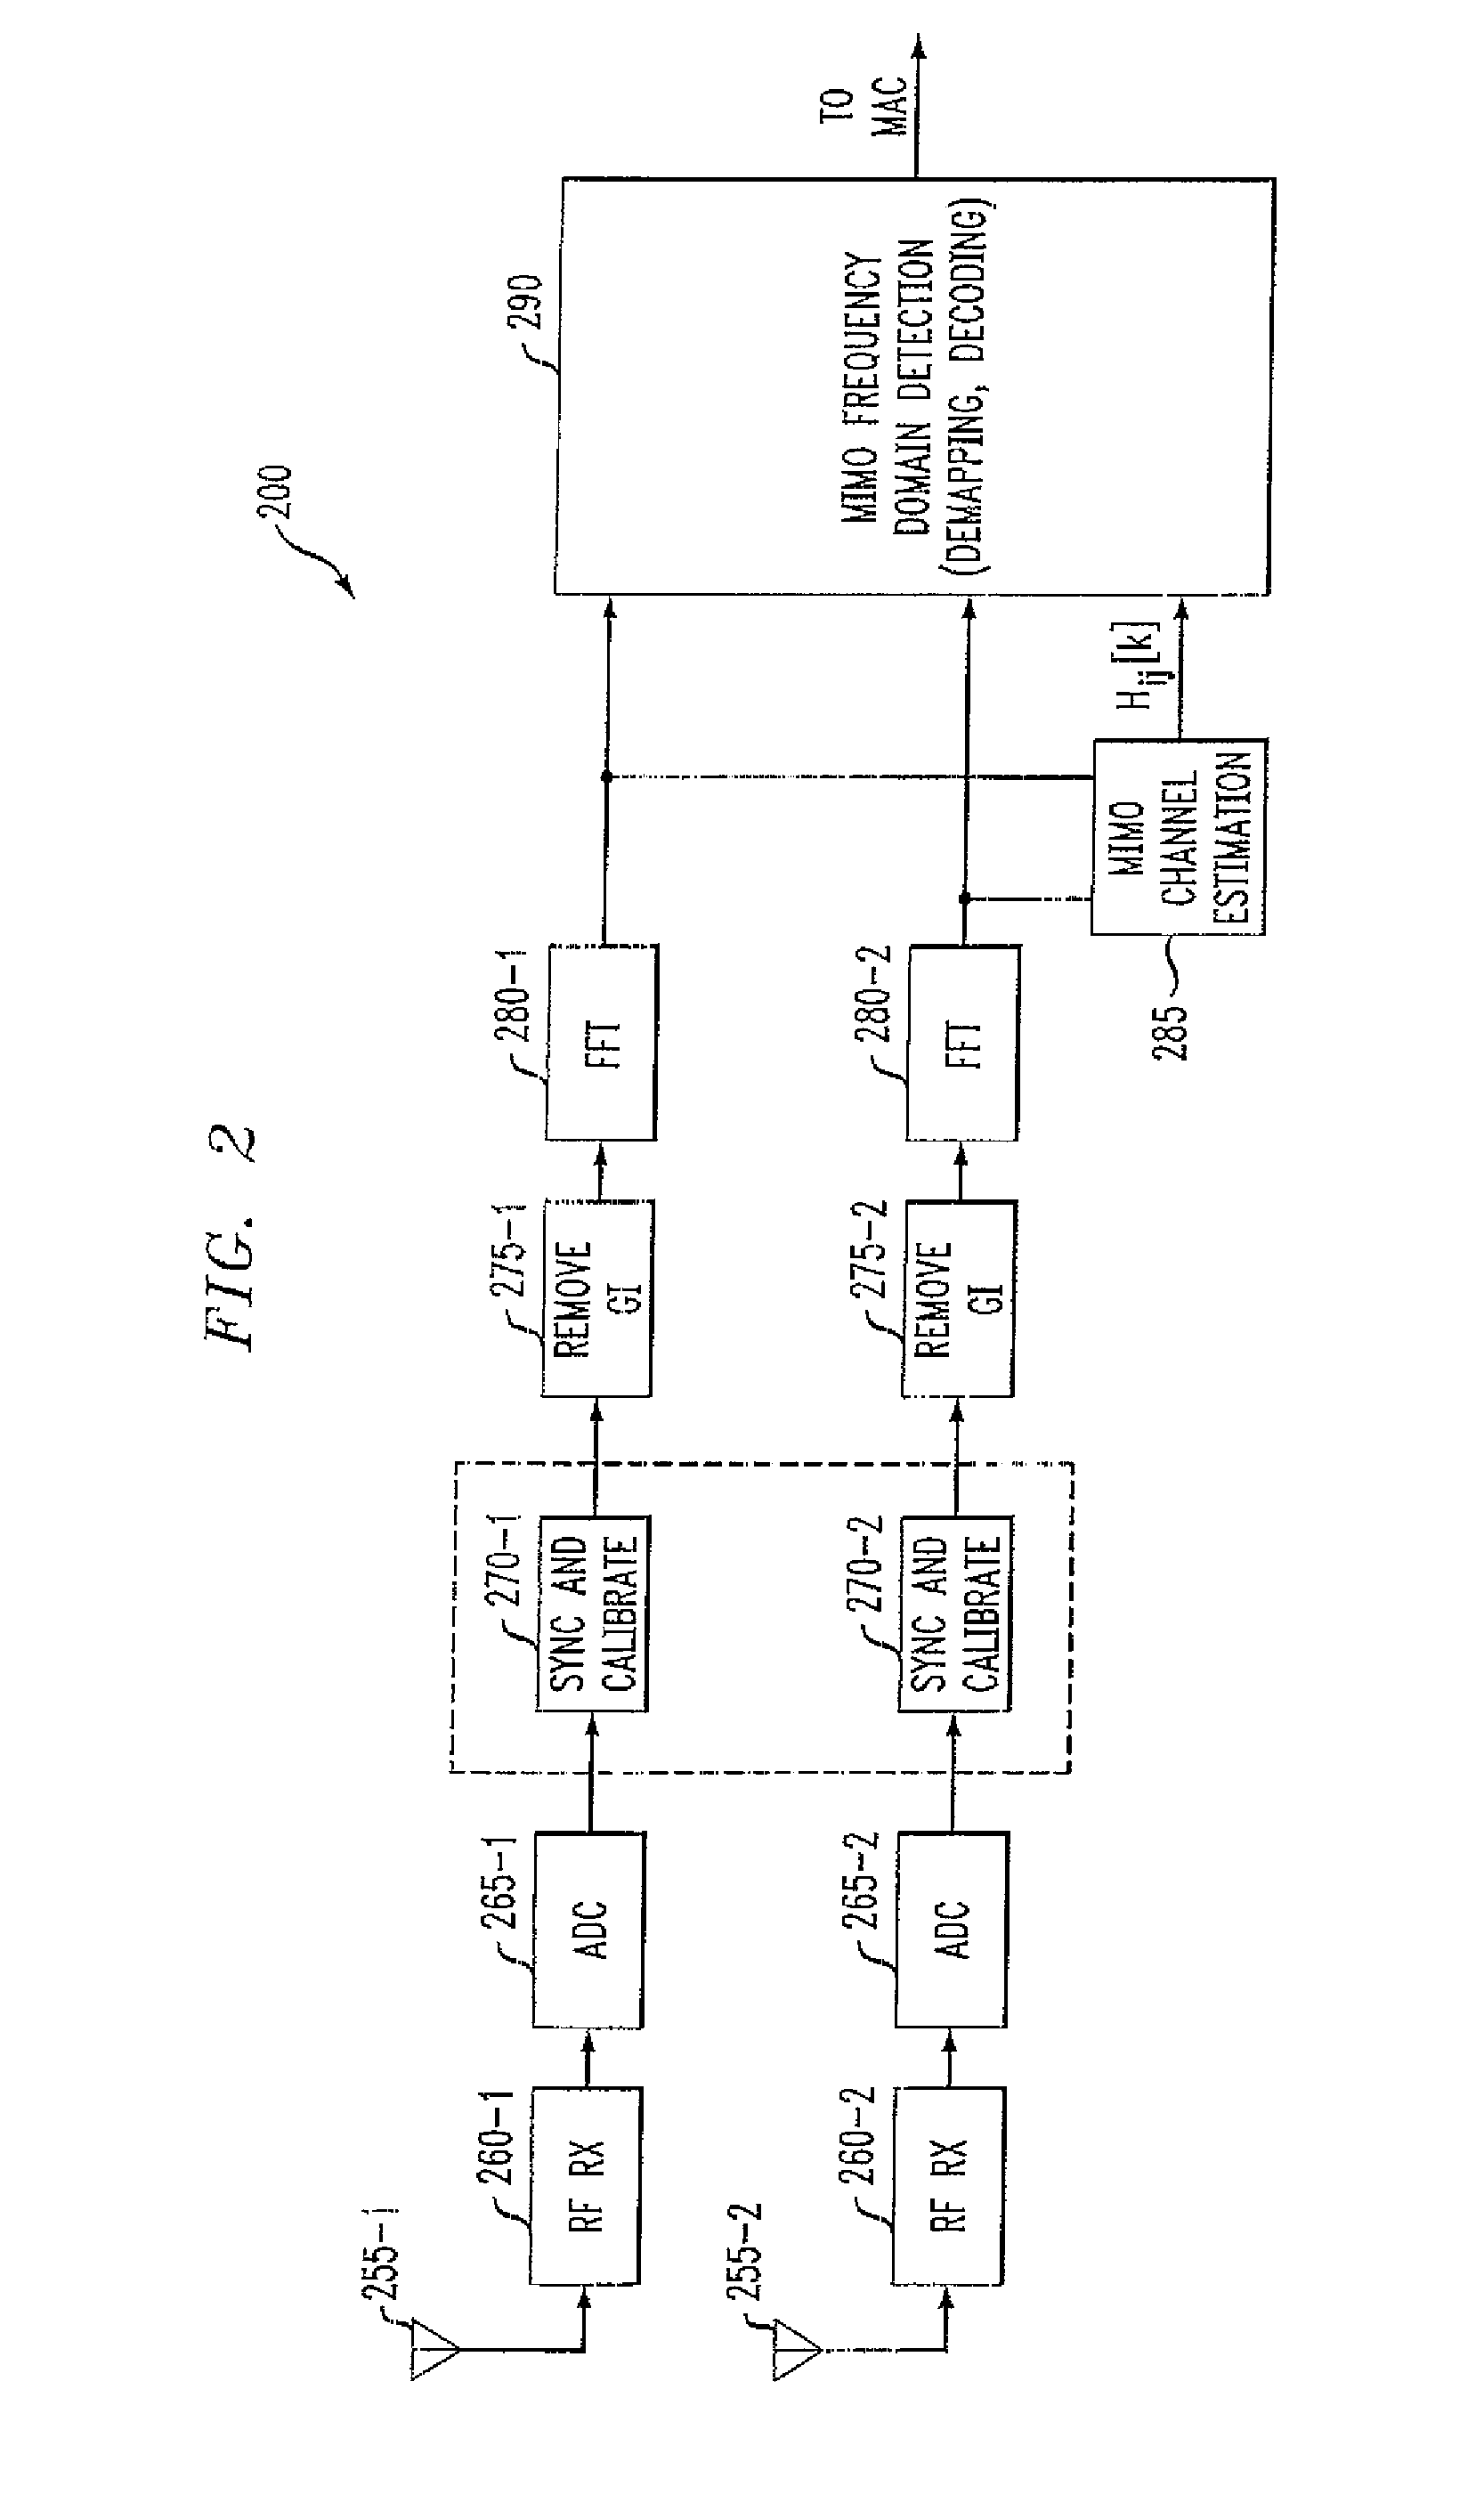 Method and apparatus for preamble training in a multiple antenna communication system